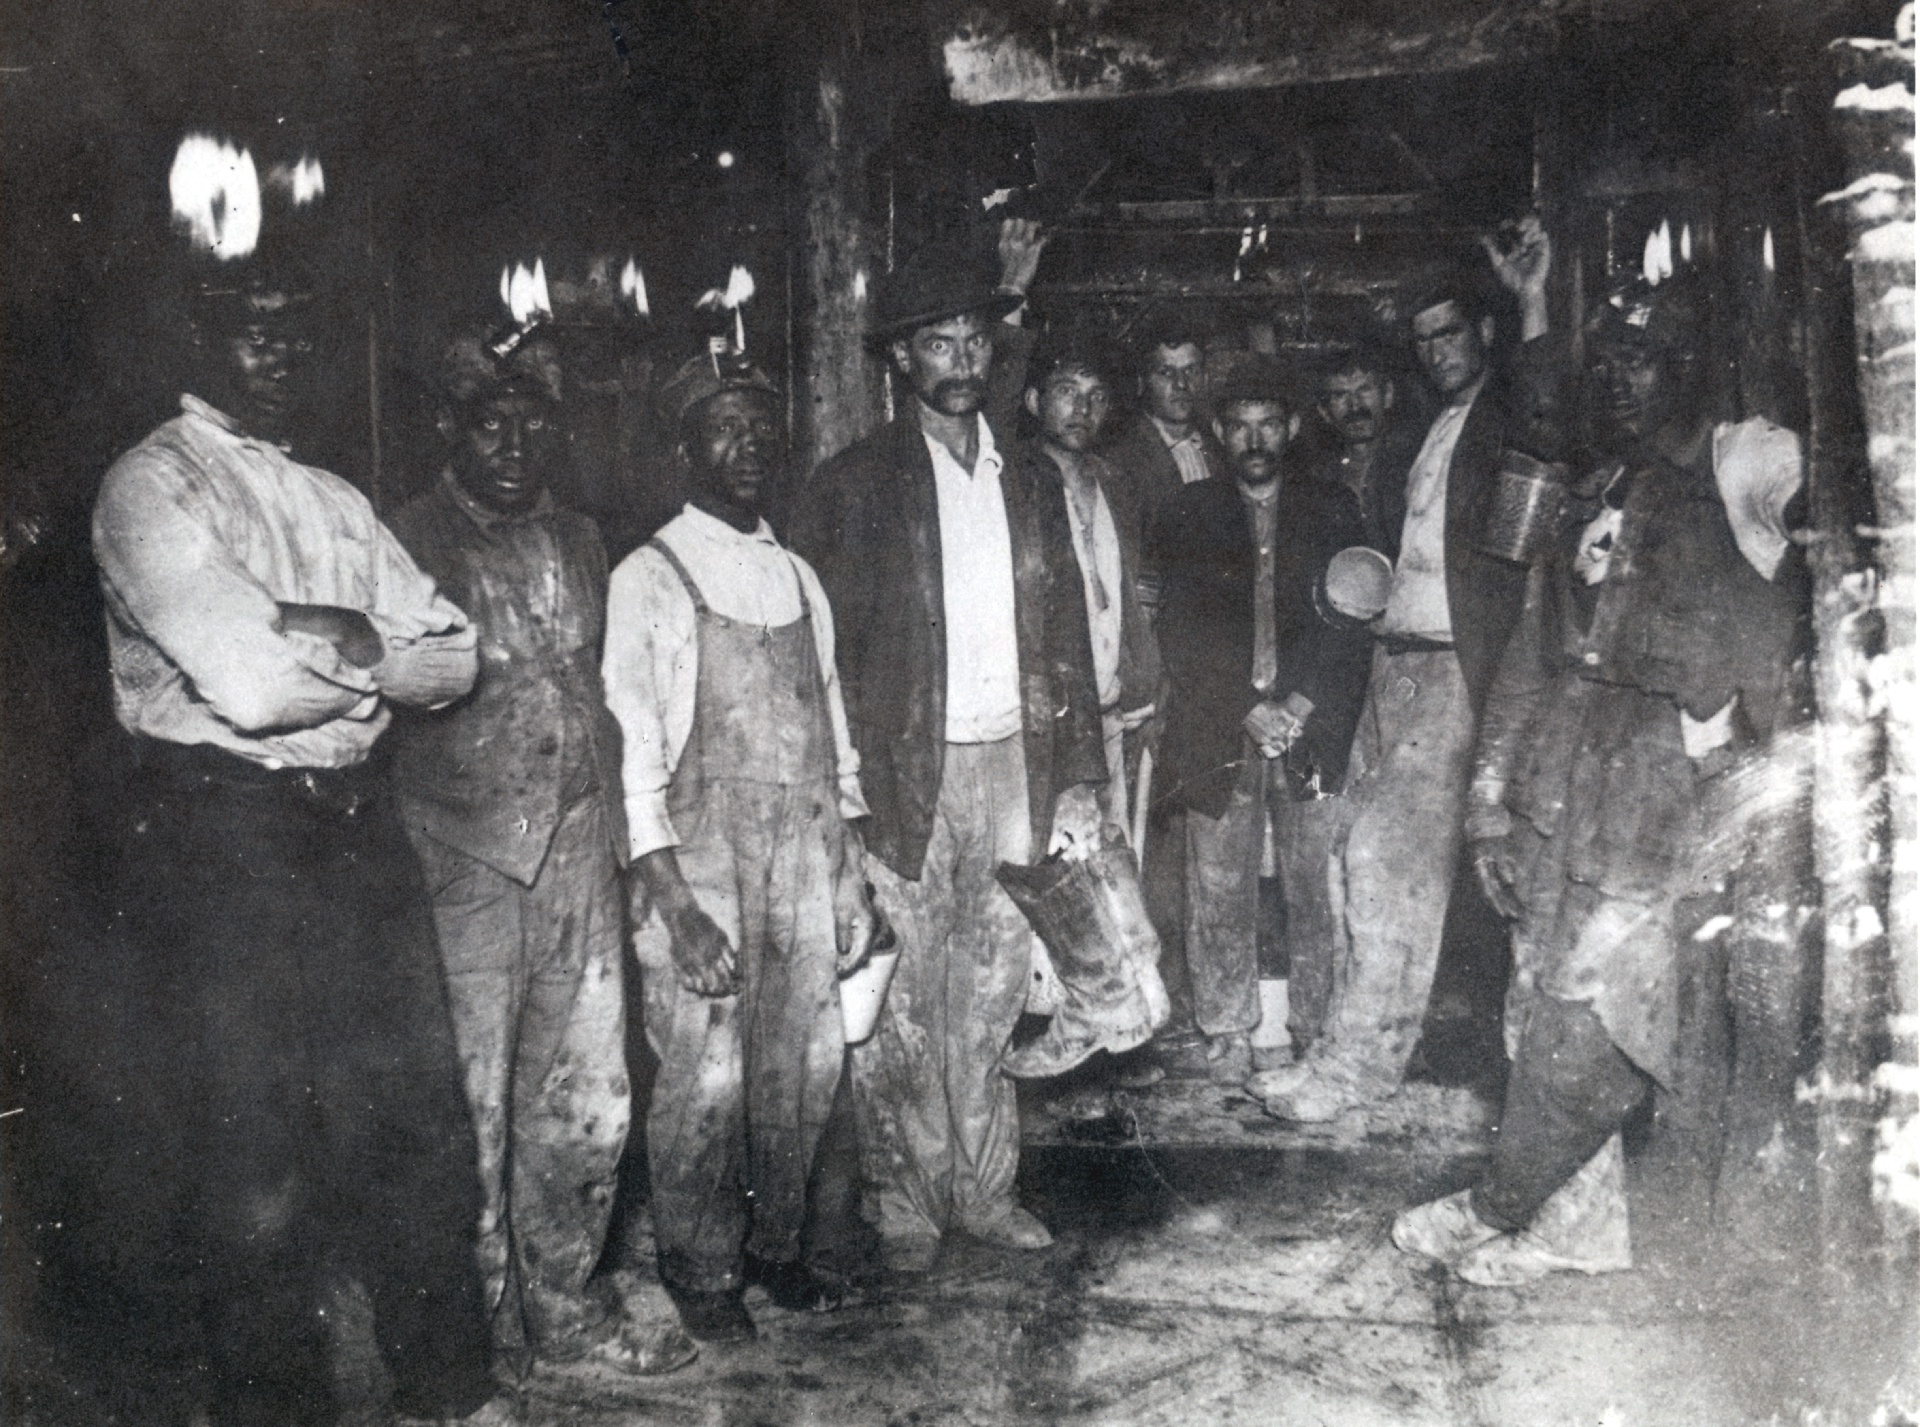 St. Louis Clay Miners